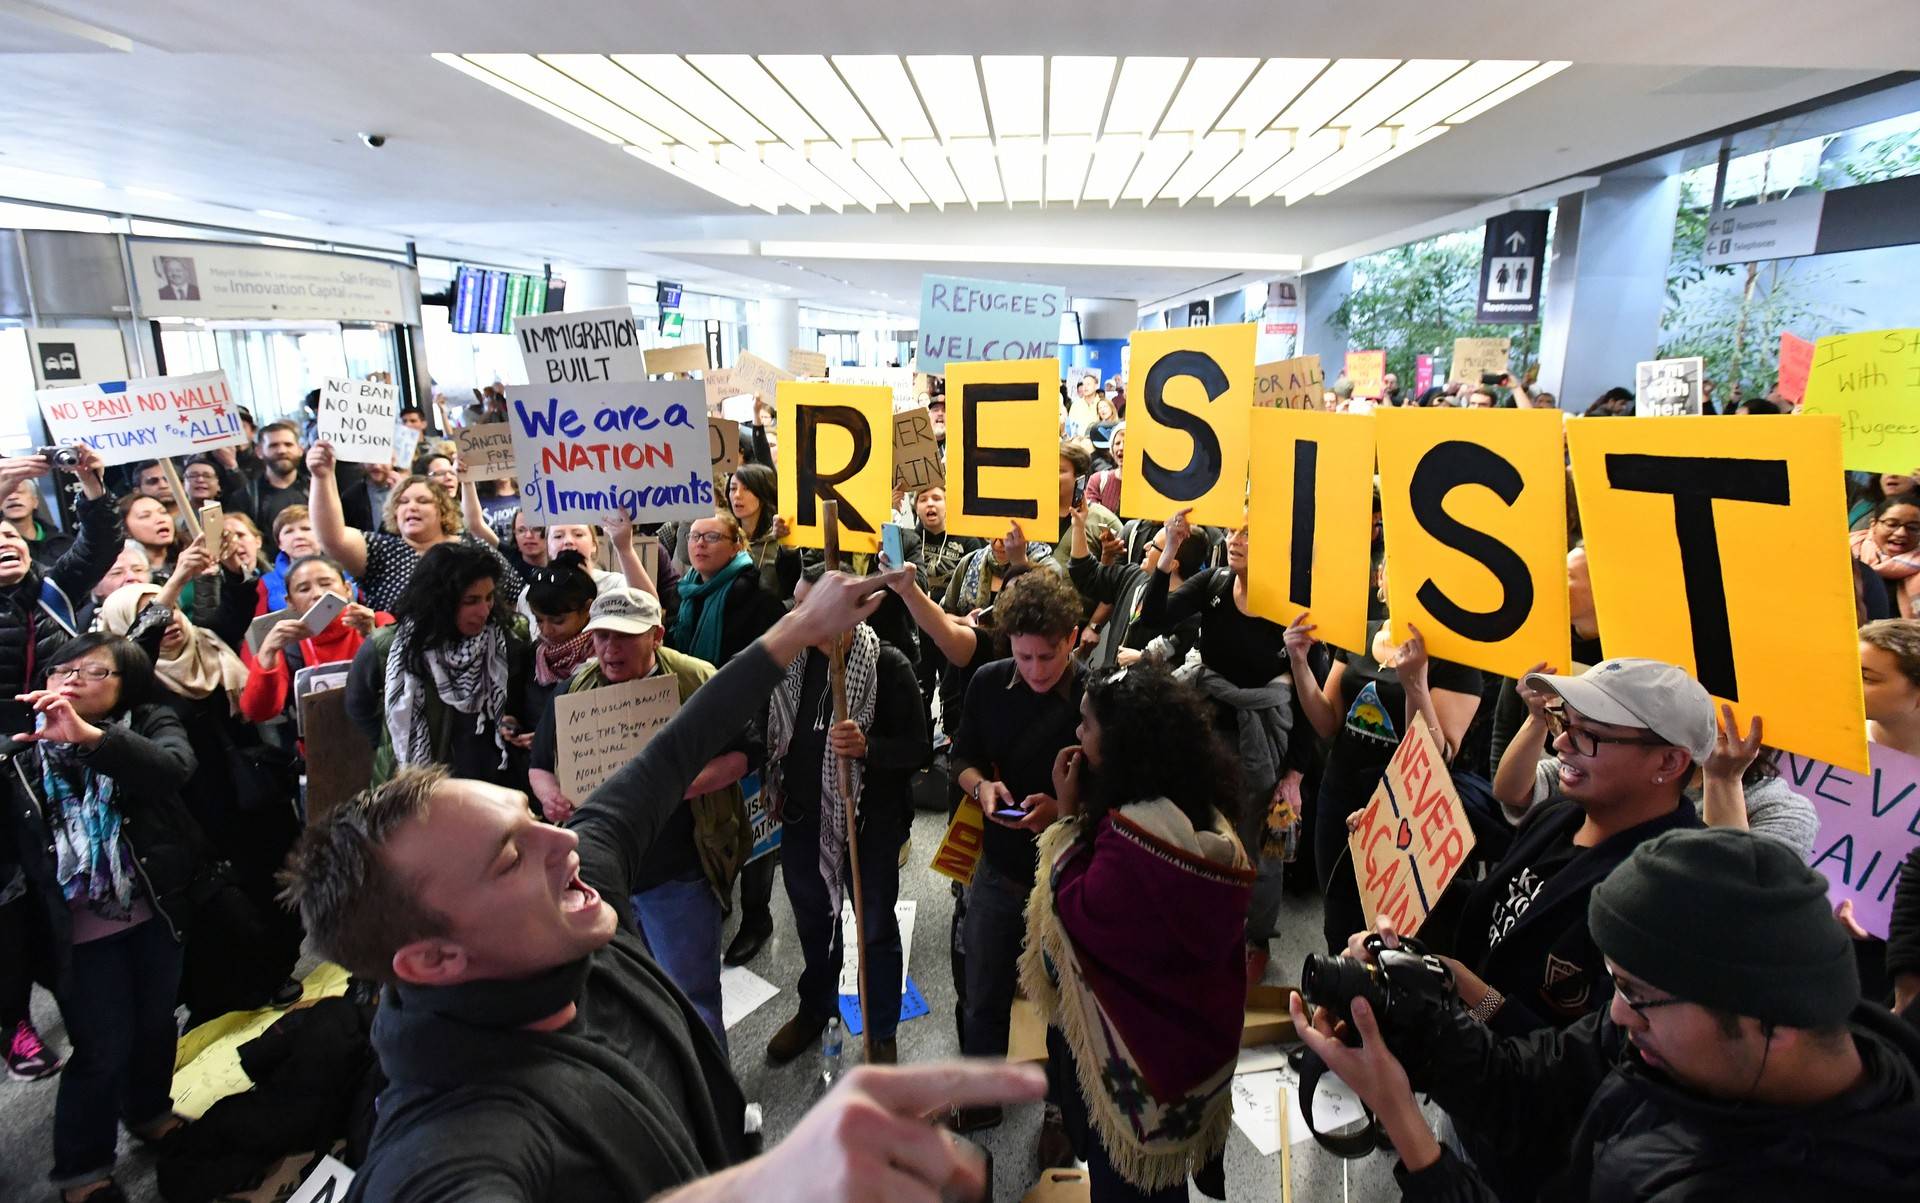 Protesters hold signs up during a protest at San Francisco International Airport in San Francisco, California on January 29, 2017. JOSH EDELSON/AFP/Getty Images